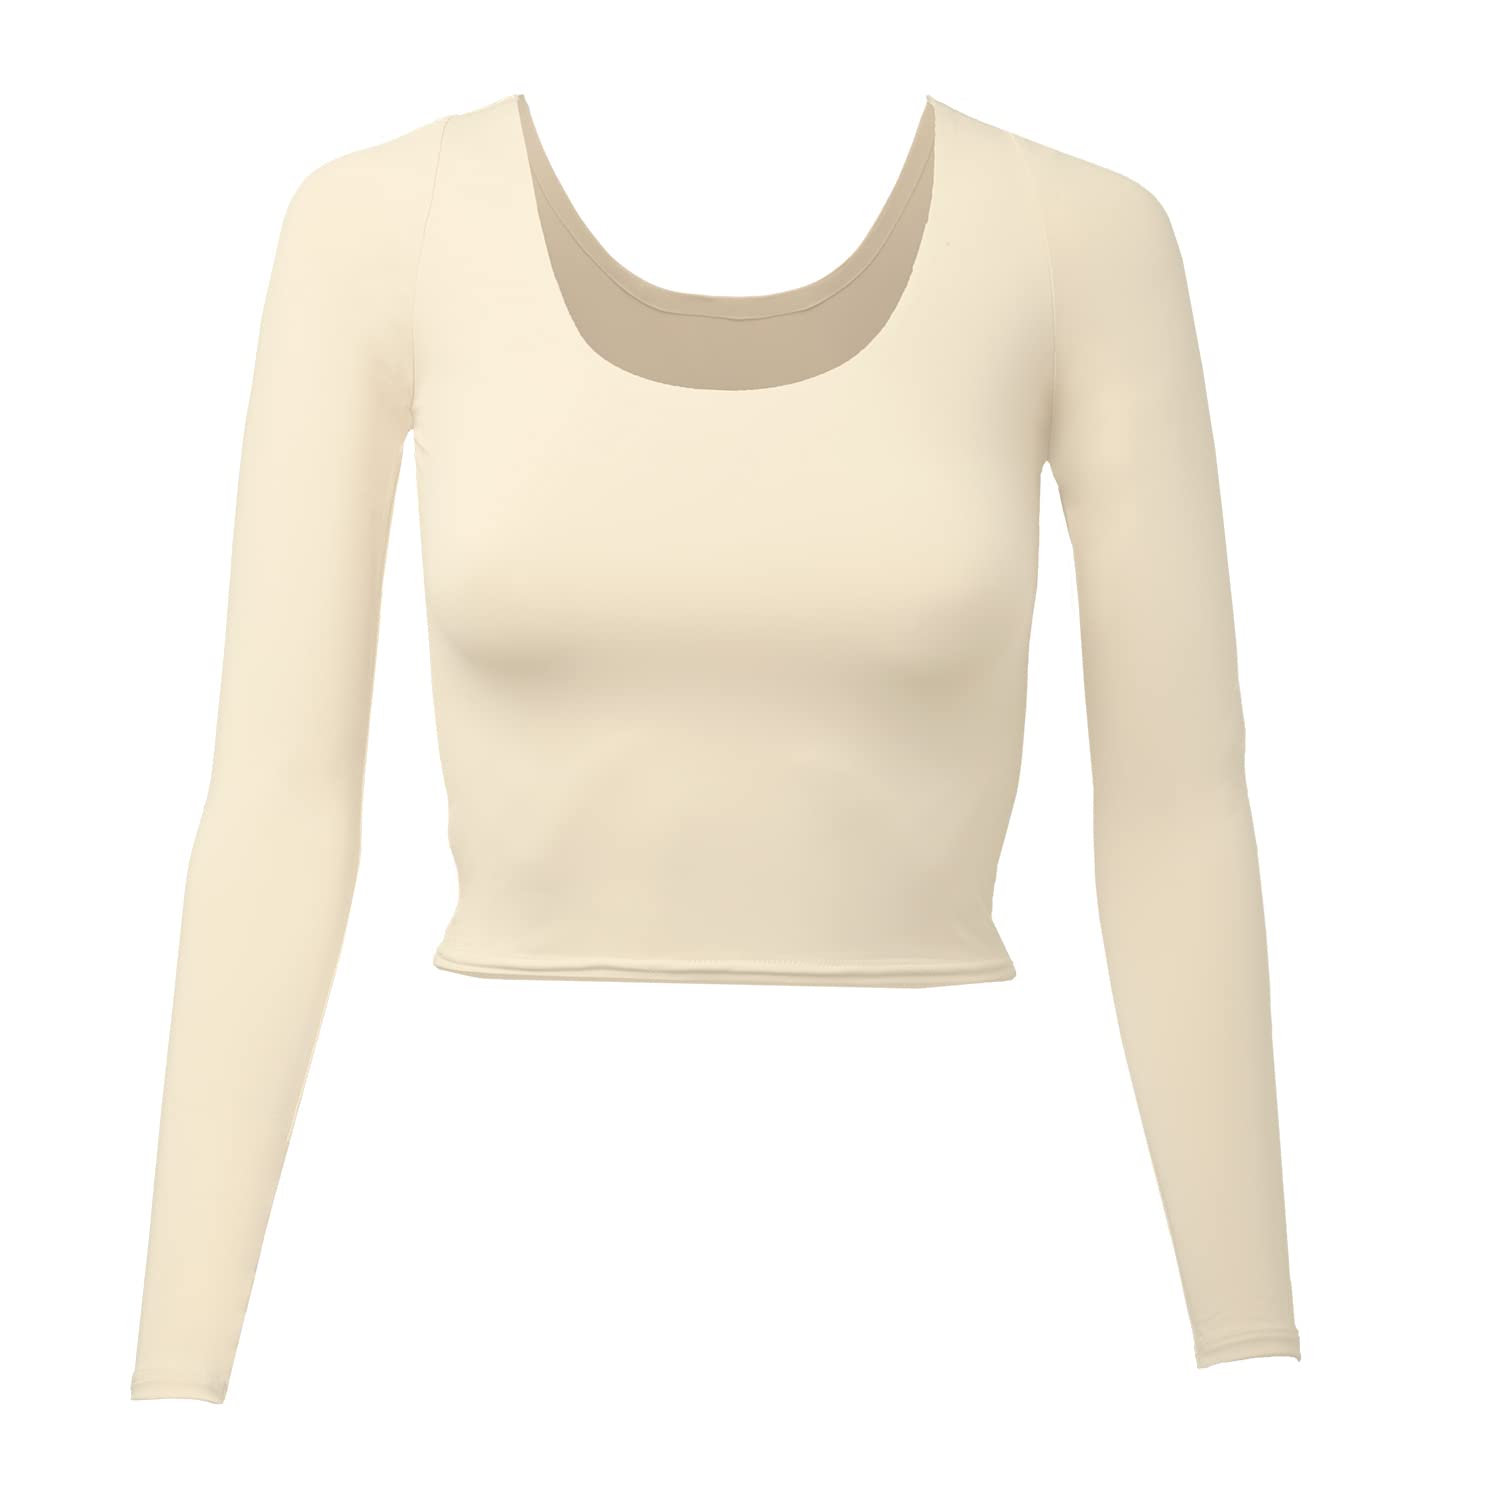 Almere Long Sleeve Top for Women, Contour Double-Lined Seamless Smooth Fabric Sleeved Basic Top, Low Neck Cut, Medium, Cream